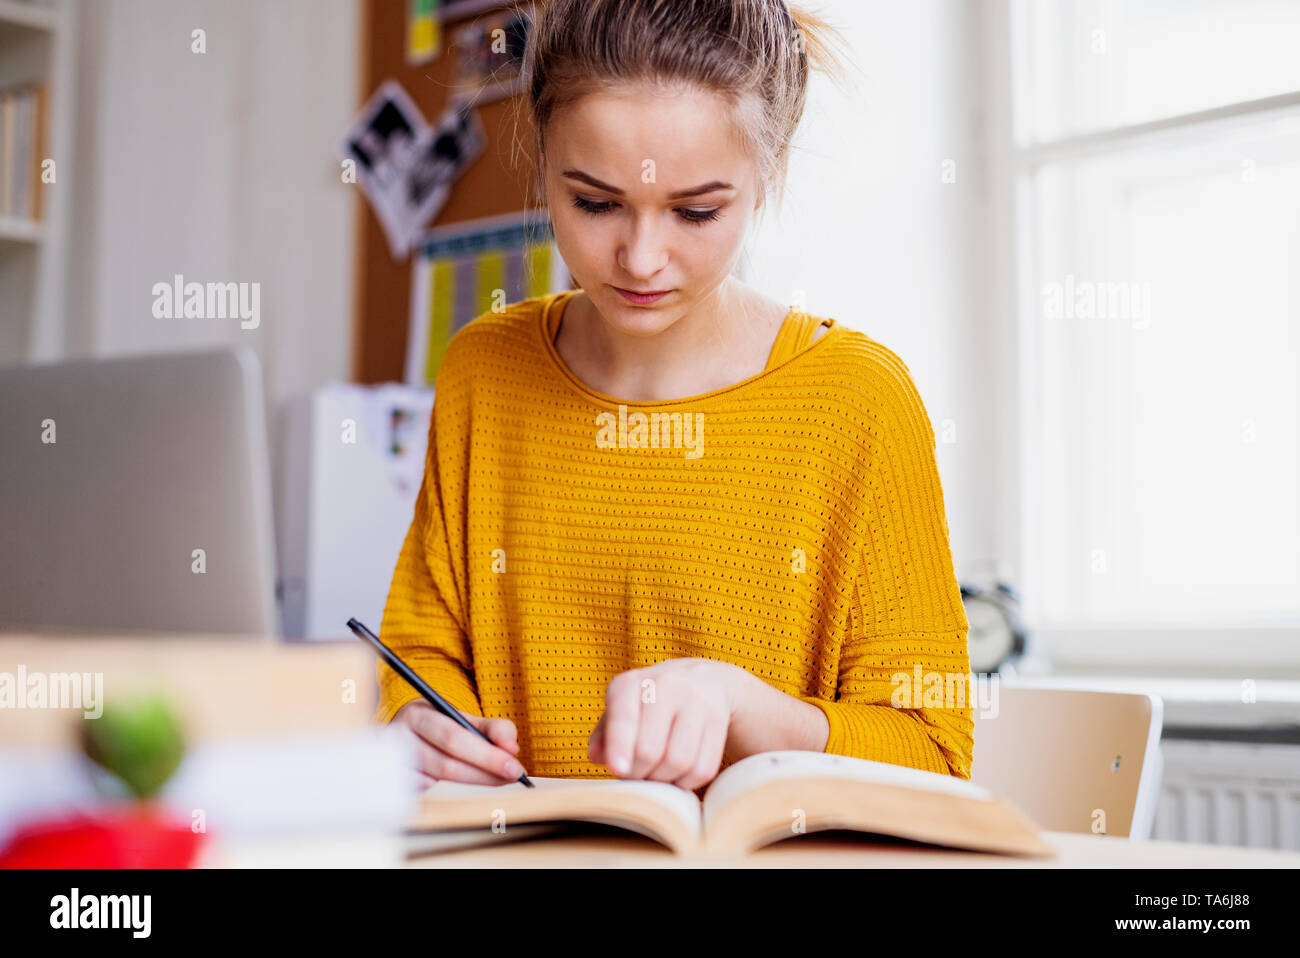 A young female student sitting at the table, studying. Stock Photo